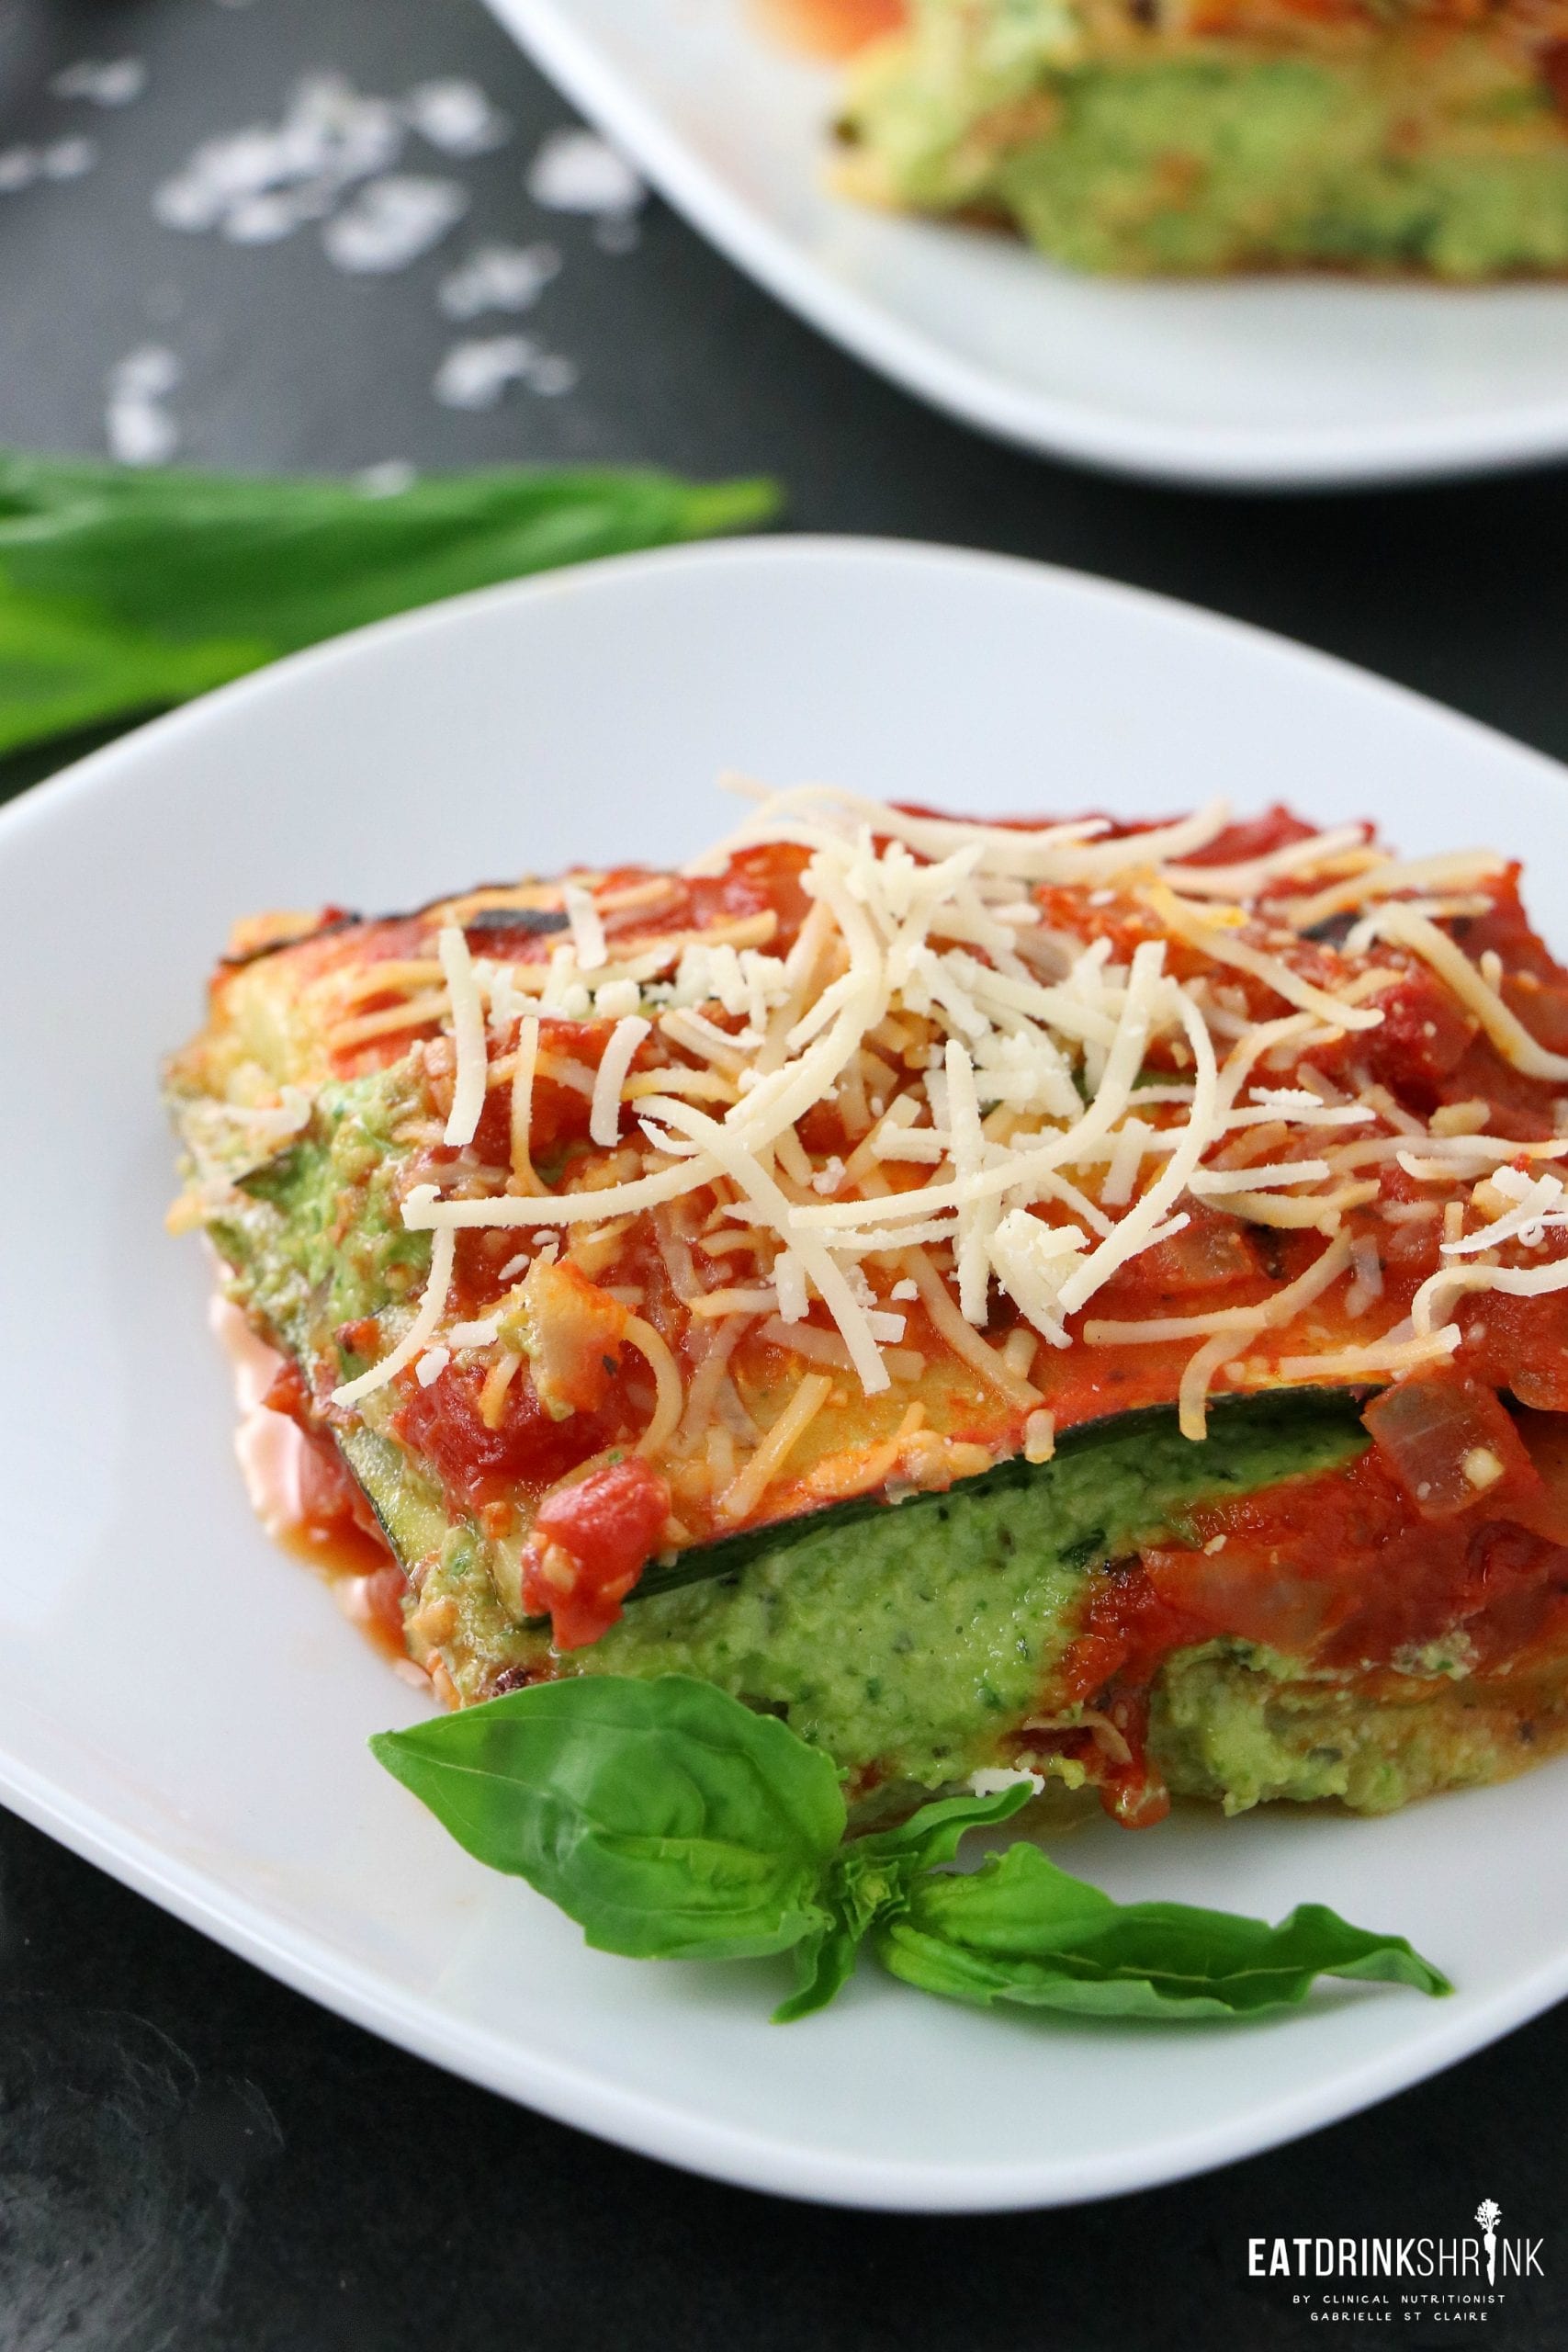 Vegan Grilled Zucchini Lasagna with Spinach Basil Cashew Cheese